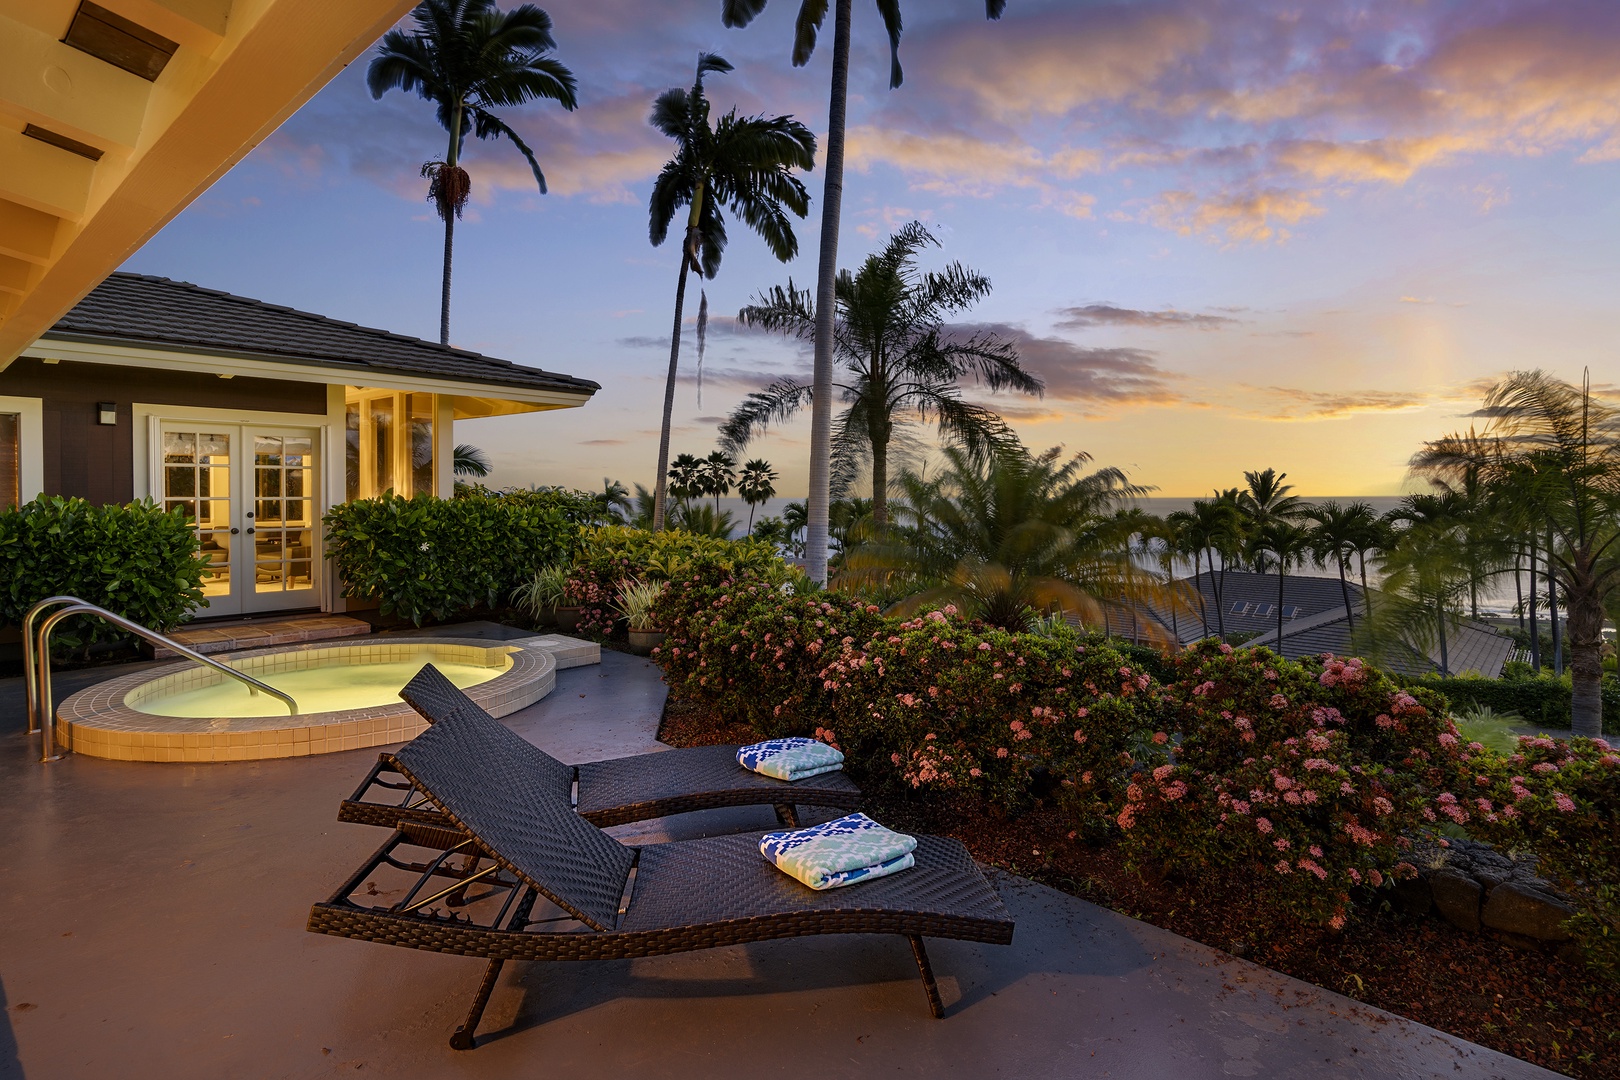 Kailua Kona Vacation Rentals, Pineapple House - A tranquil place to spend your vacation!